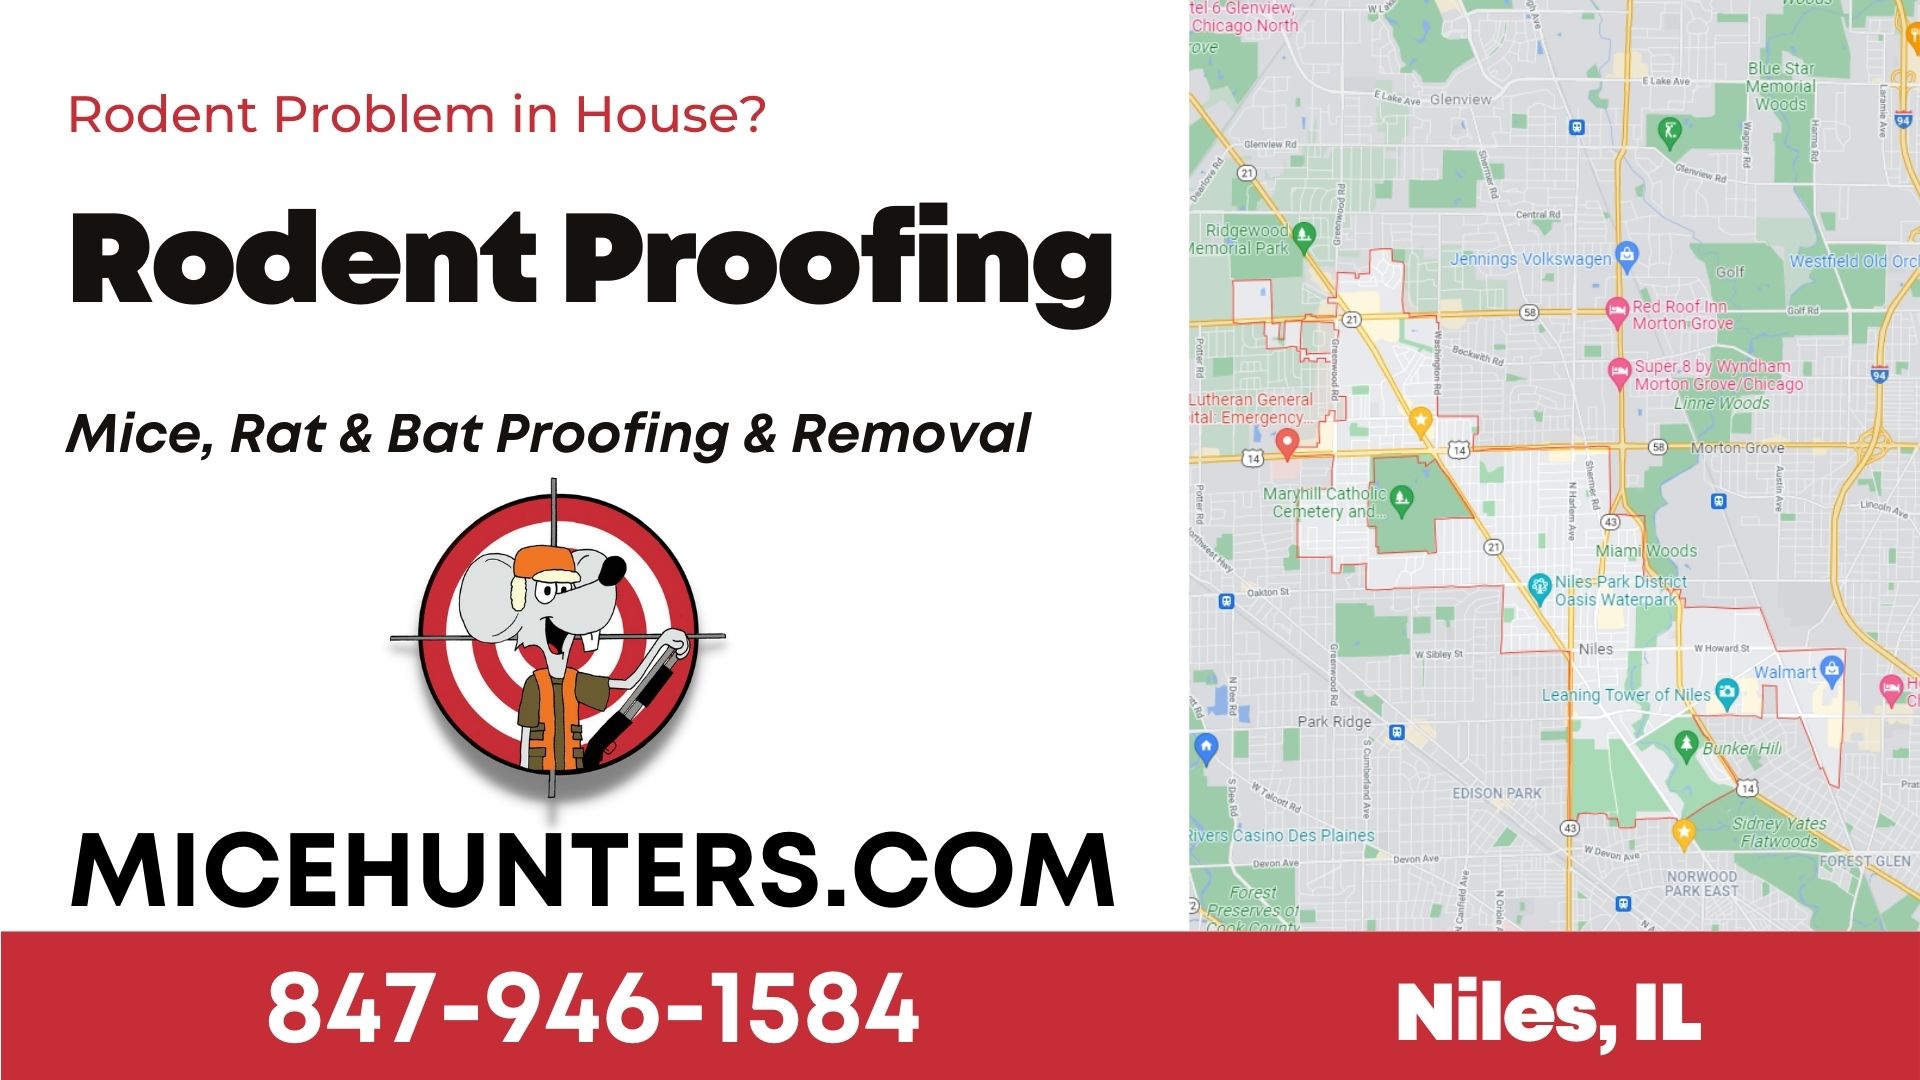 Niles Rodent and Mice Proofing Exterminator